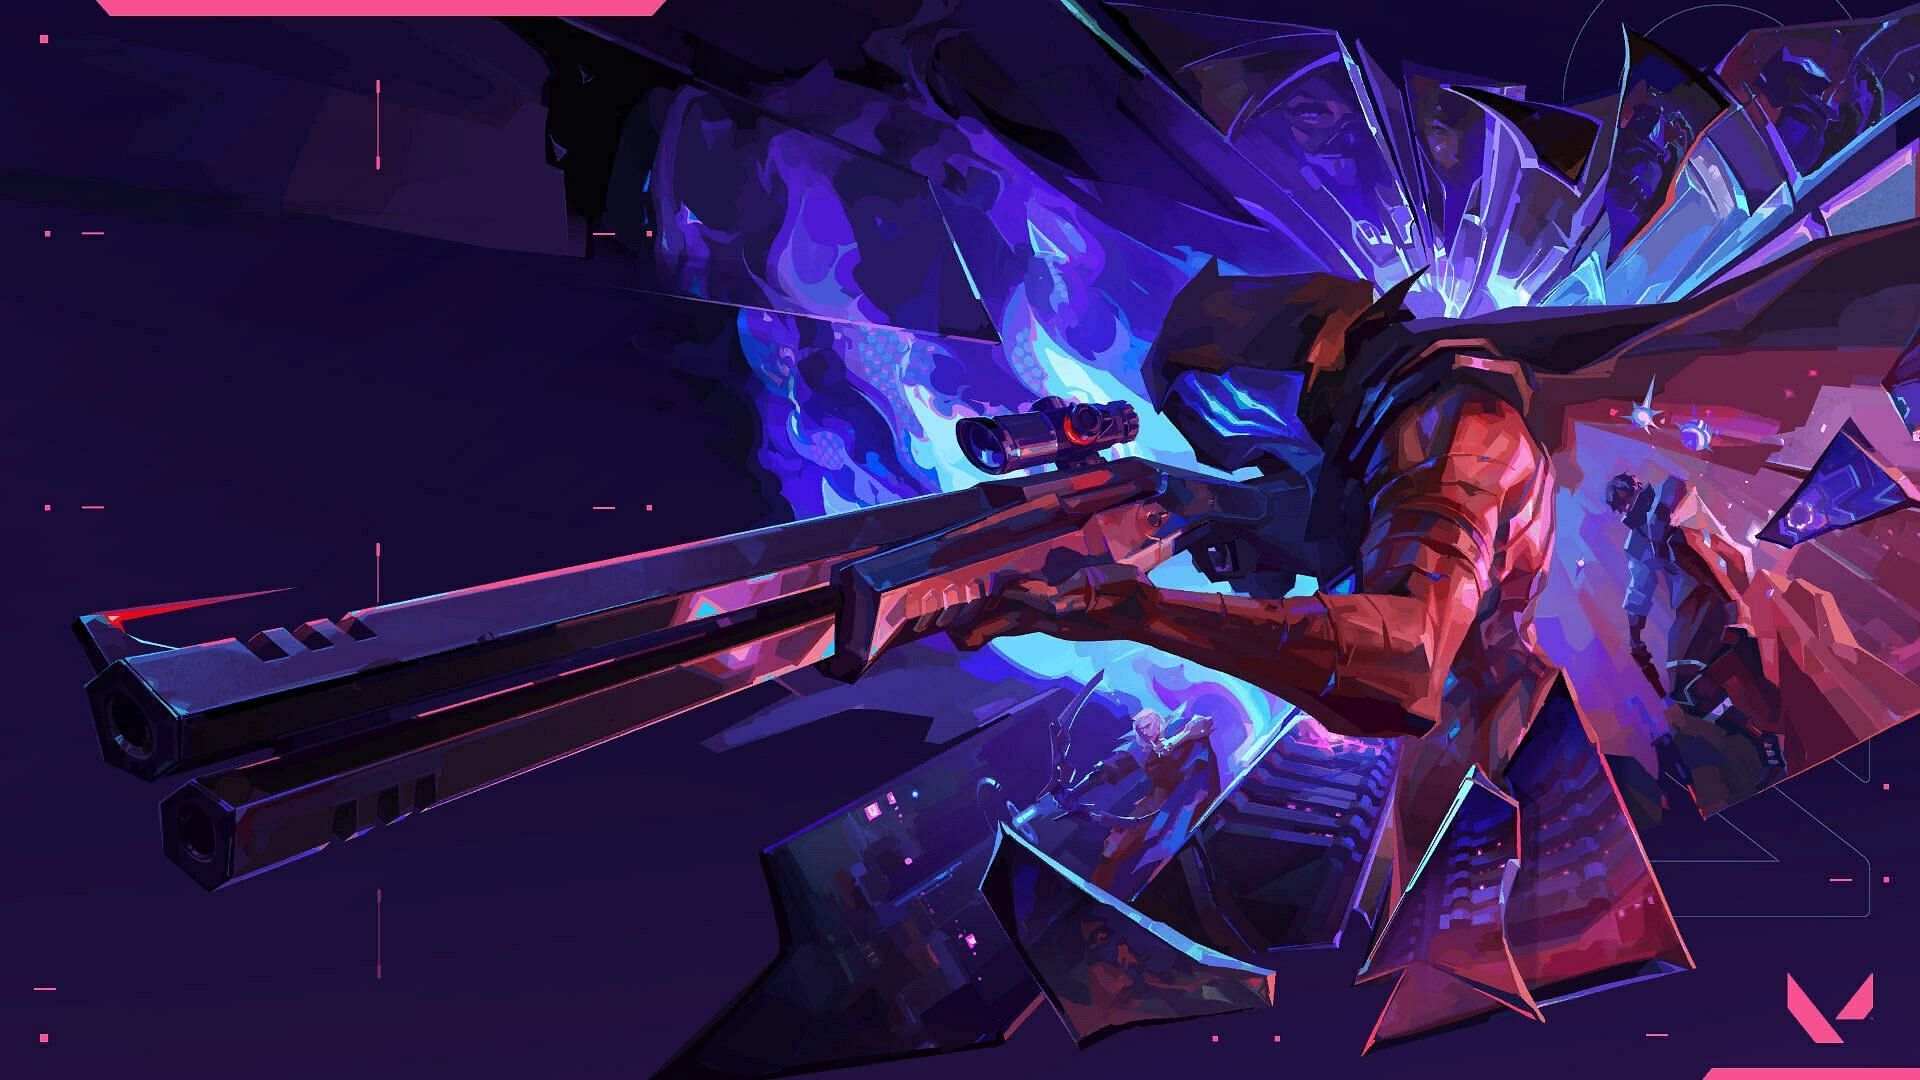 Episode 8 Act 1 key art depicting the Outlaw sniper rifle (Image via Riot Games)